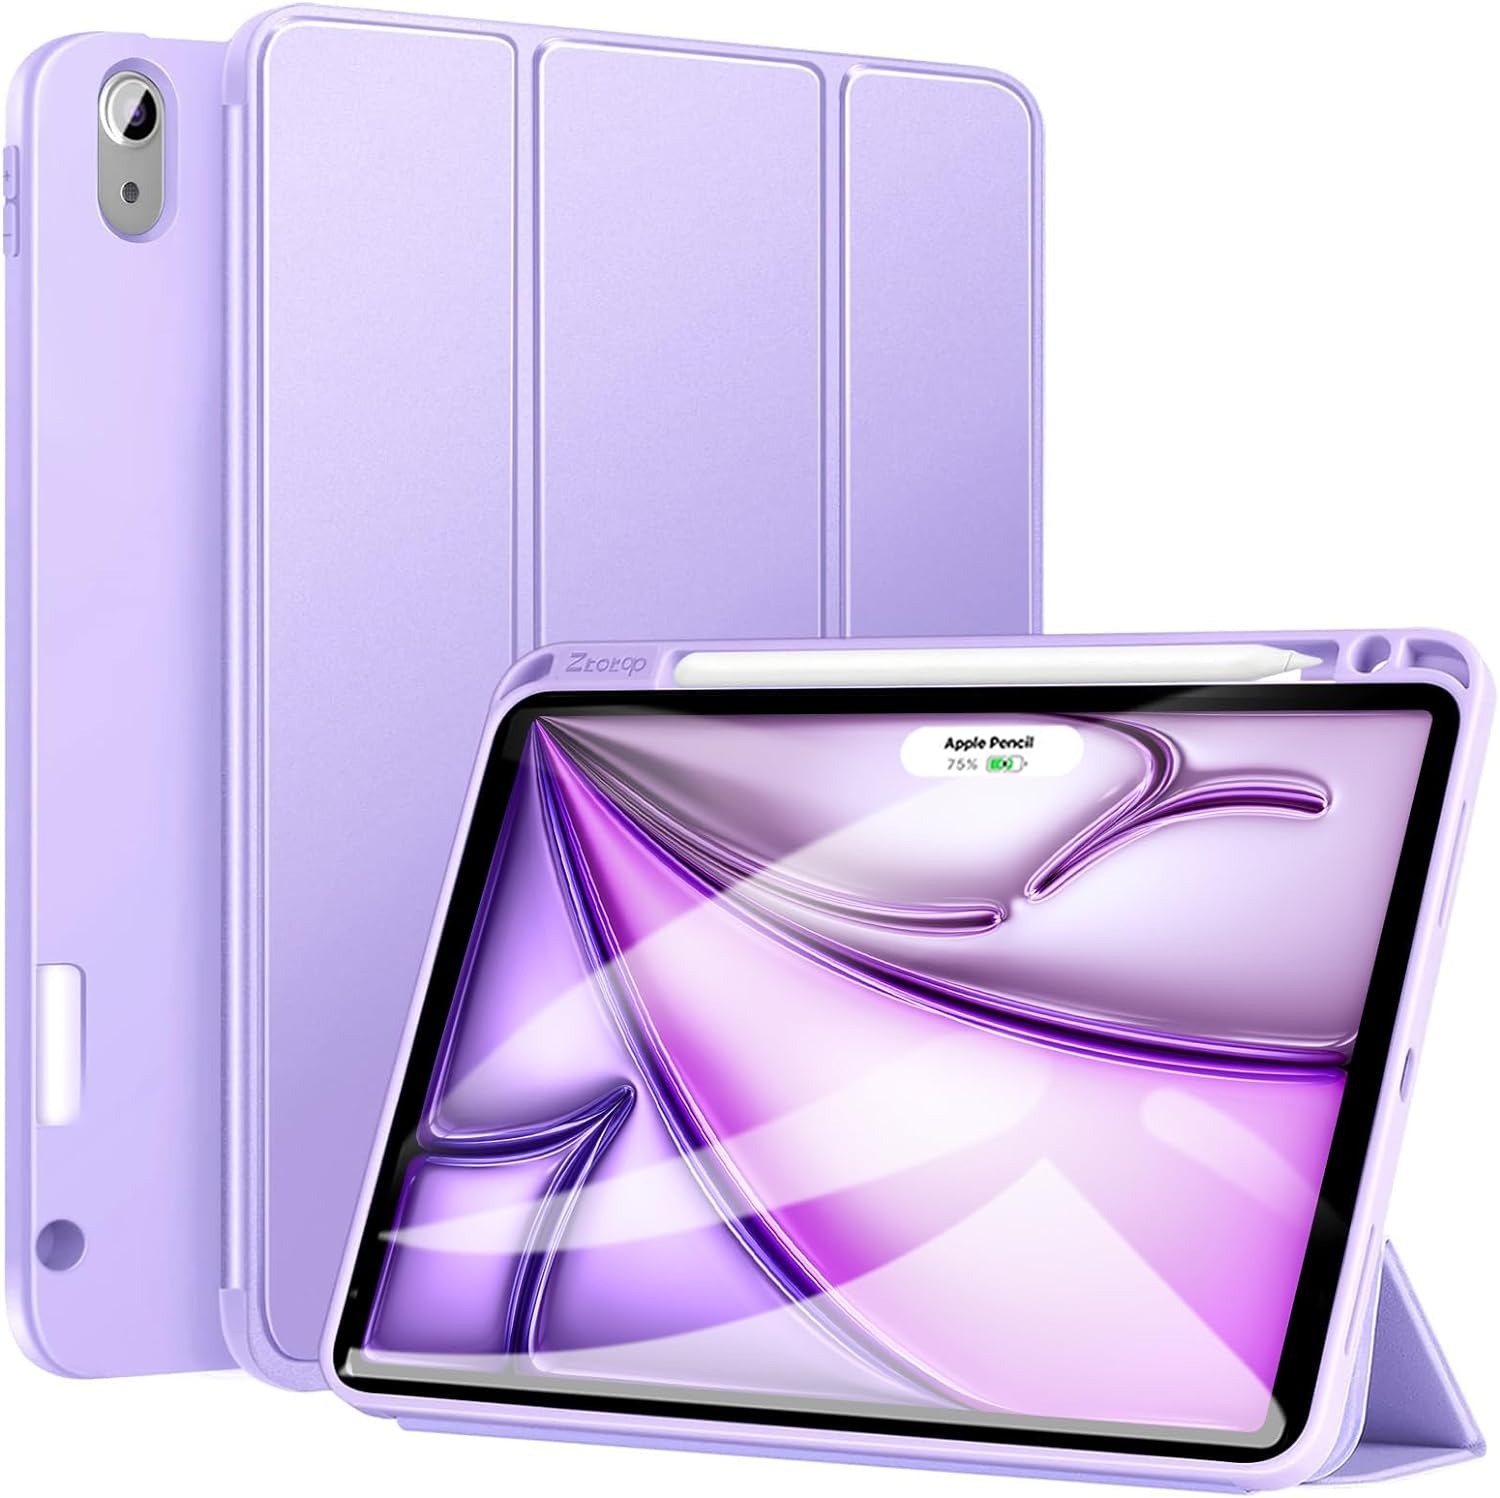 ZtotopCases for iPad Air 6th Generation 11 Inch 2024 Case & iPad Air 5th/4th Gen 10.9 Inch 2022/2020 & iPad Pro 11" 2018 1st with Pencil Holder, Soft TPU Back Slim Trifold Smart Cover, Purple